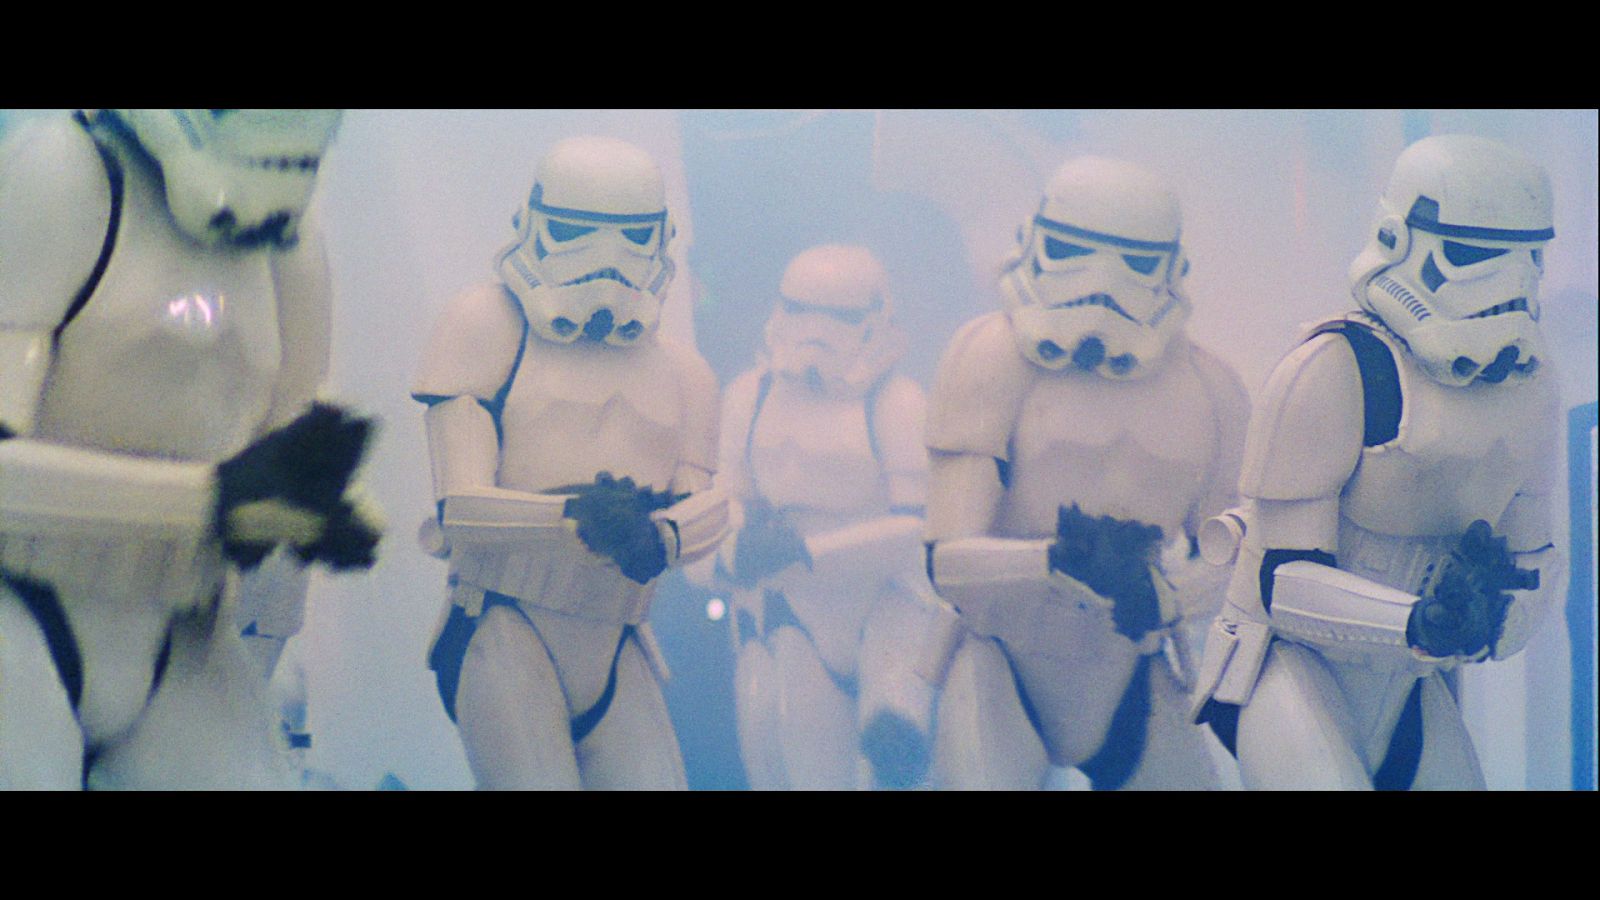 A New Hope - Bluray Screen Captures